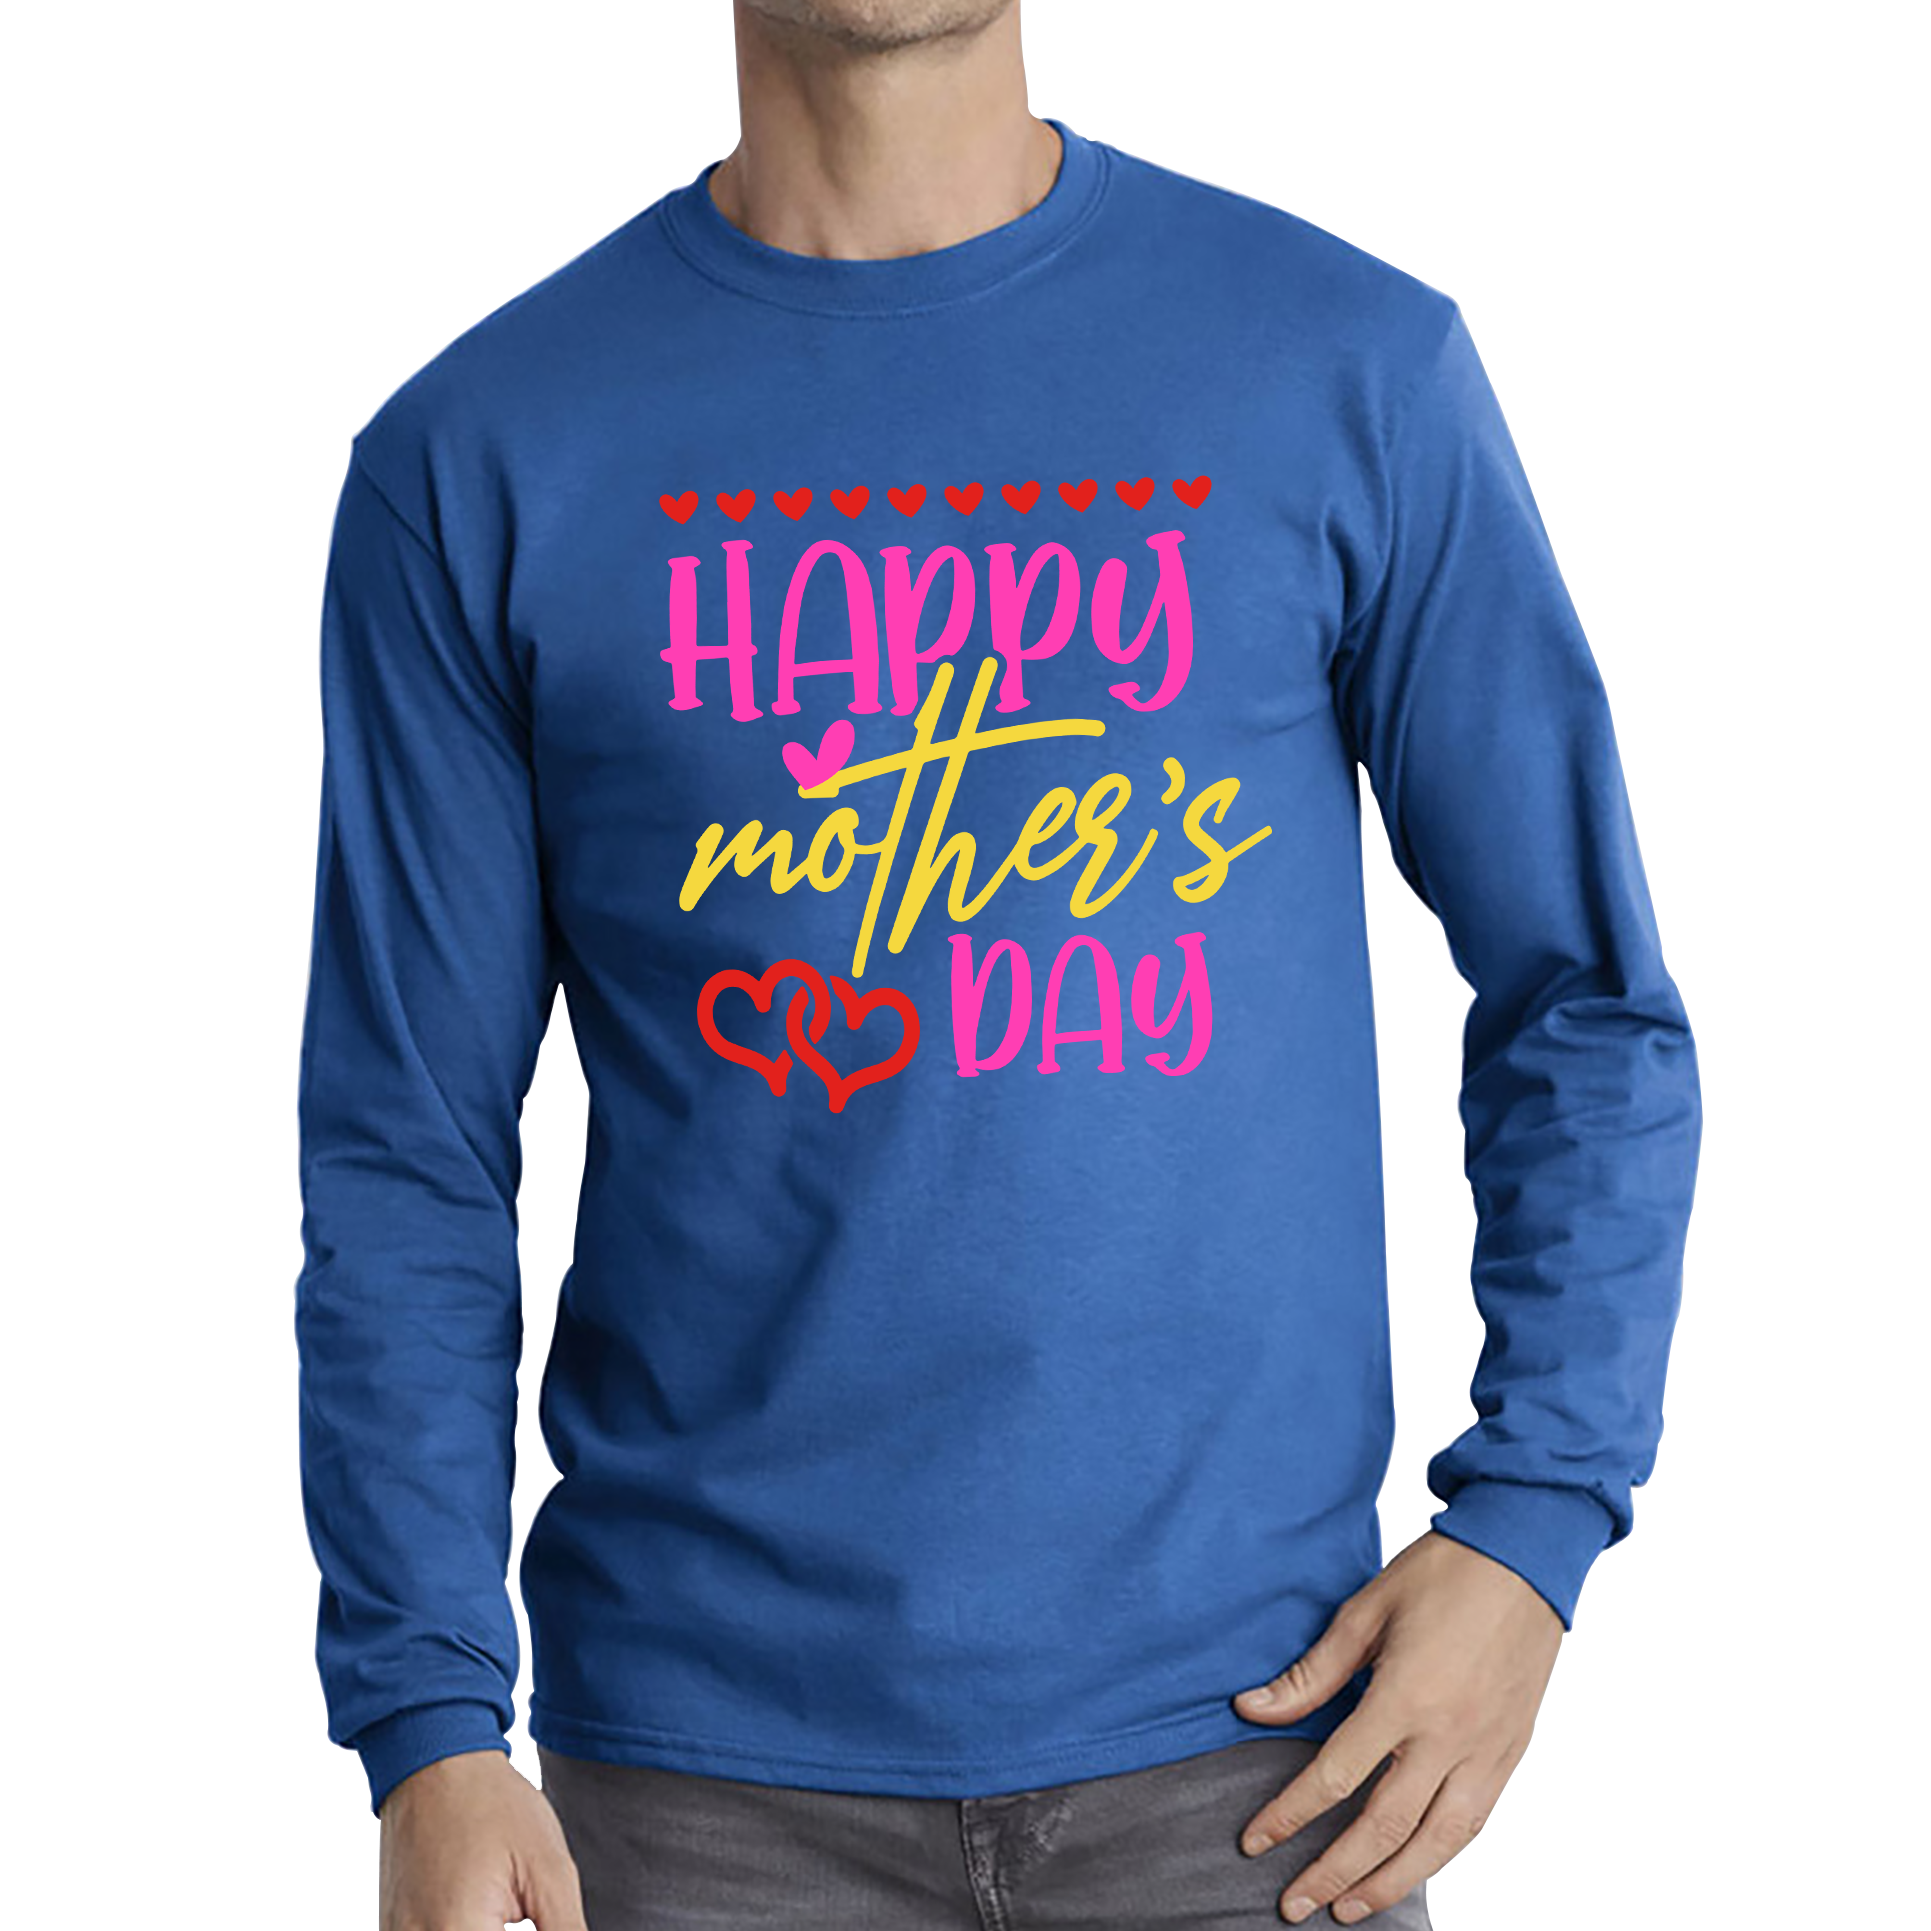 Mother's Day Adult Long Sleeve T Shirt